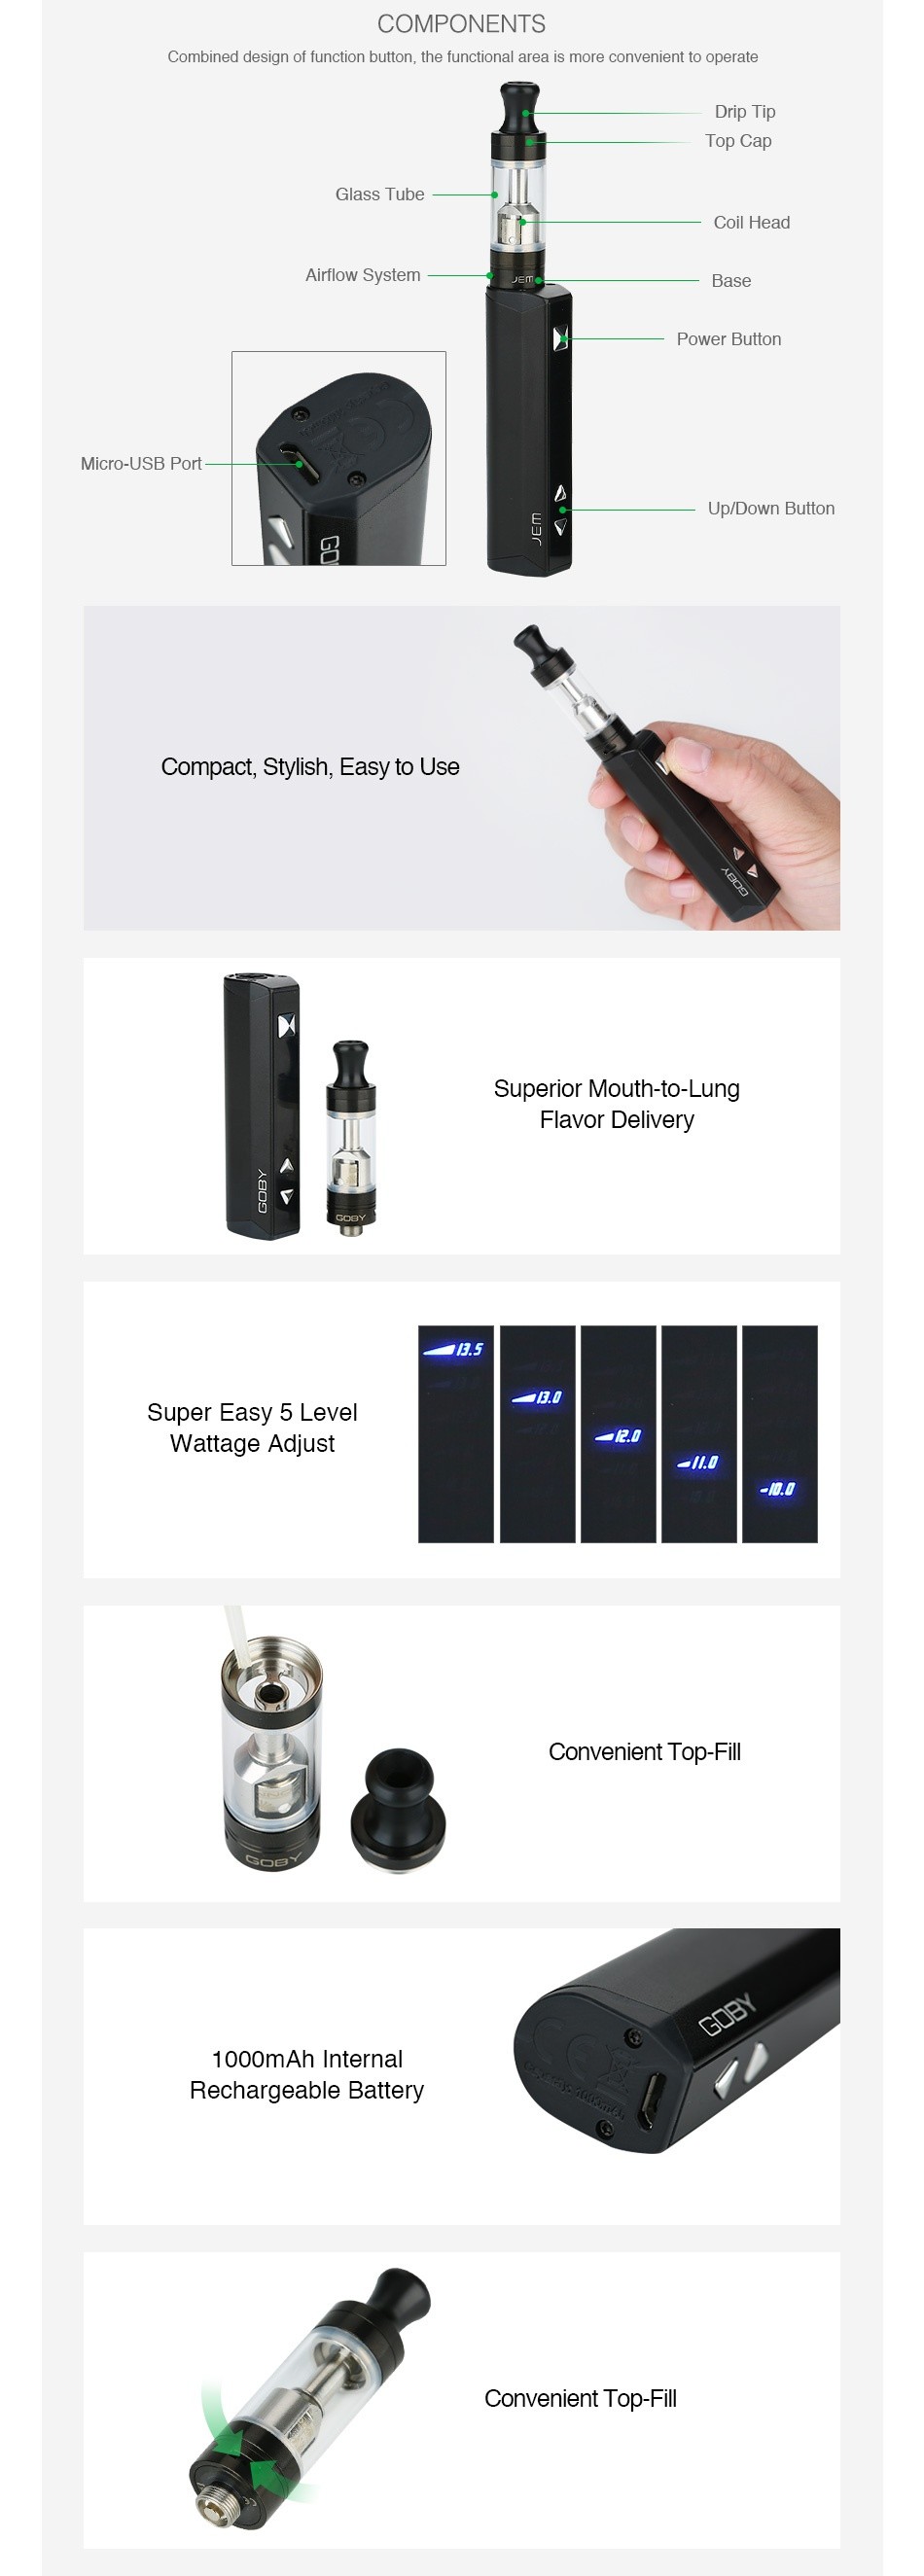 Innokin JEM/Goby VW Starter Kit 1000mAh Combined des gn of function button  the functional area is more convenient to operate Glass l ube Goll Head Compact  Stylish  Easy to Use Superior Mouth to Lung Flavor Delivery Super Easy 5 Level Convenient Top Fill 1000mAh Intern a Rechargeable Convenient Top Fill